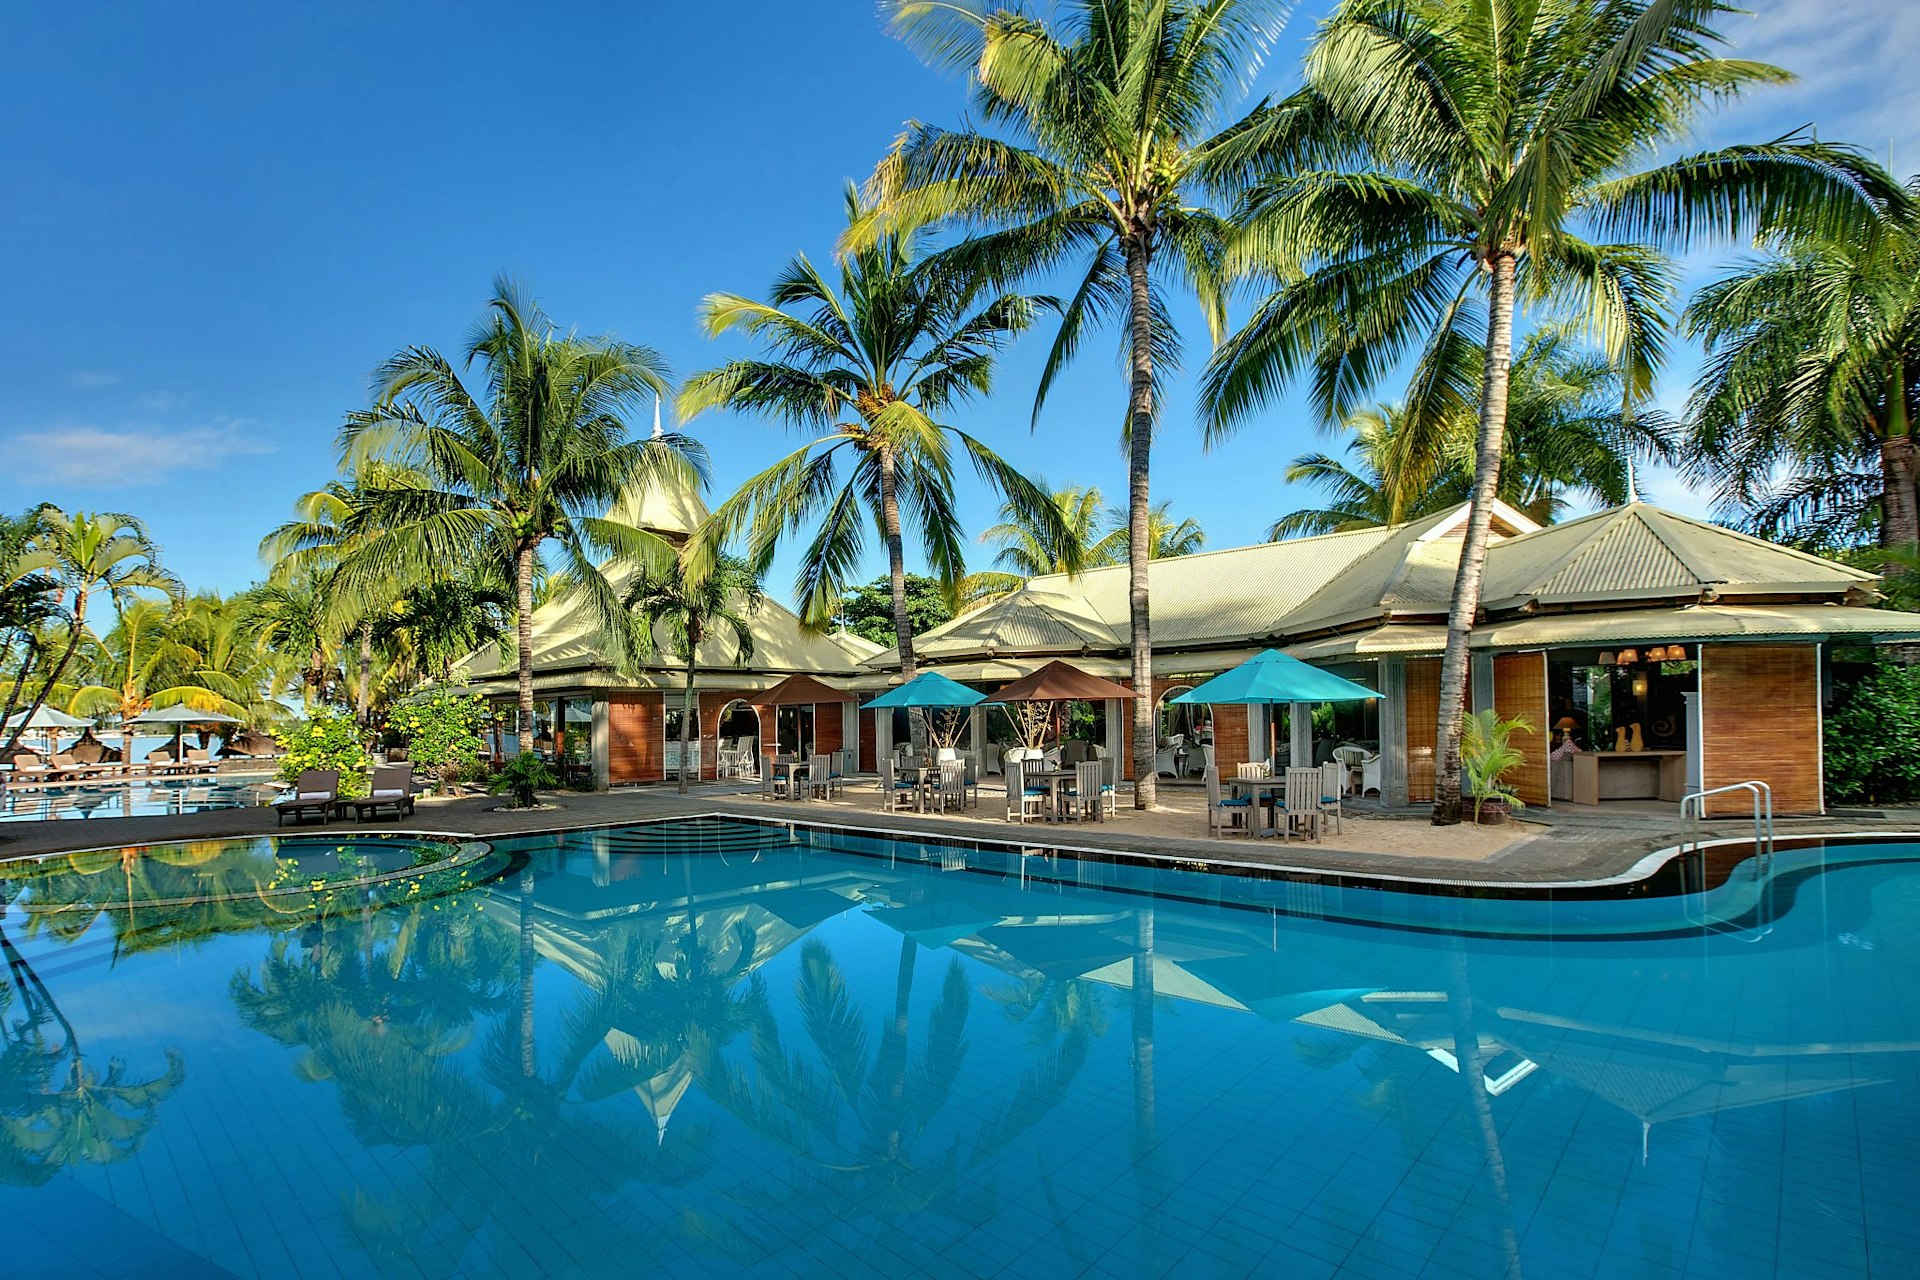 A swimming pool at the Veranda Grand Baie Mauritius, on a sunny day. Palm trees and awnings are visible poolside, along with chairs and parasols